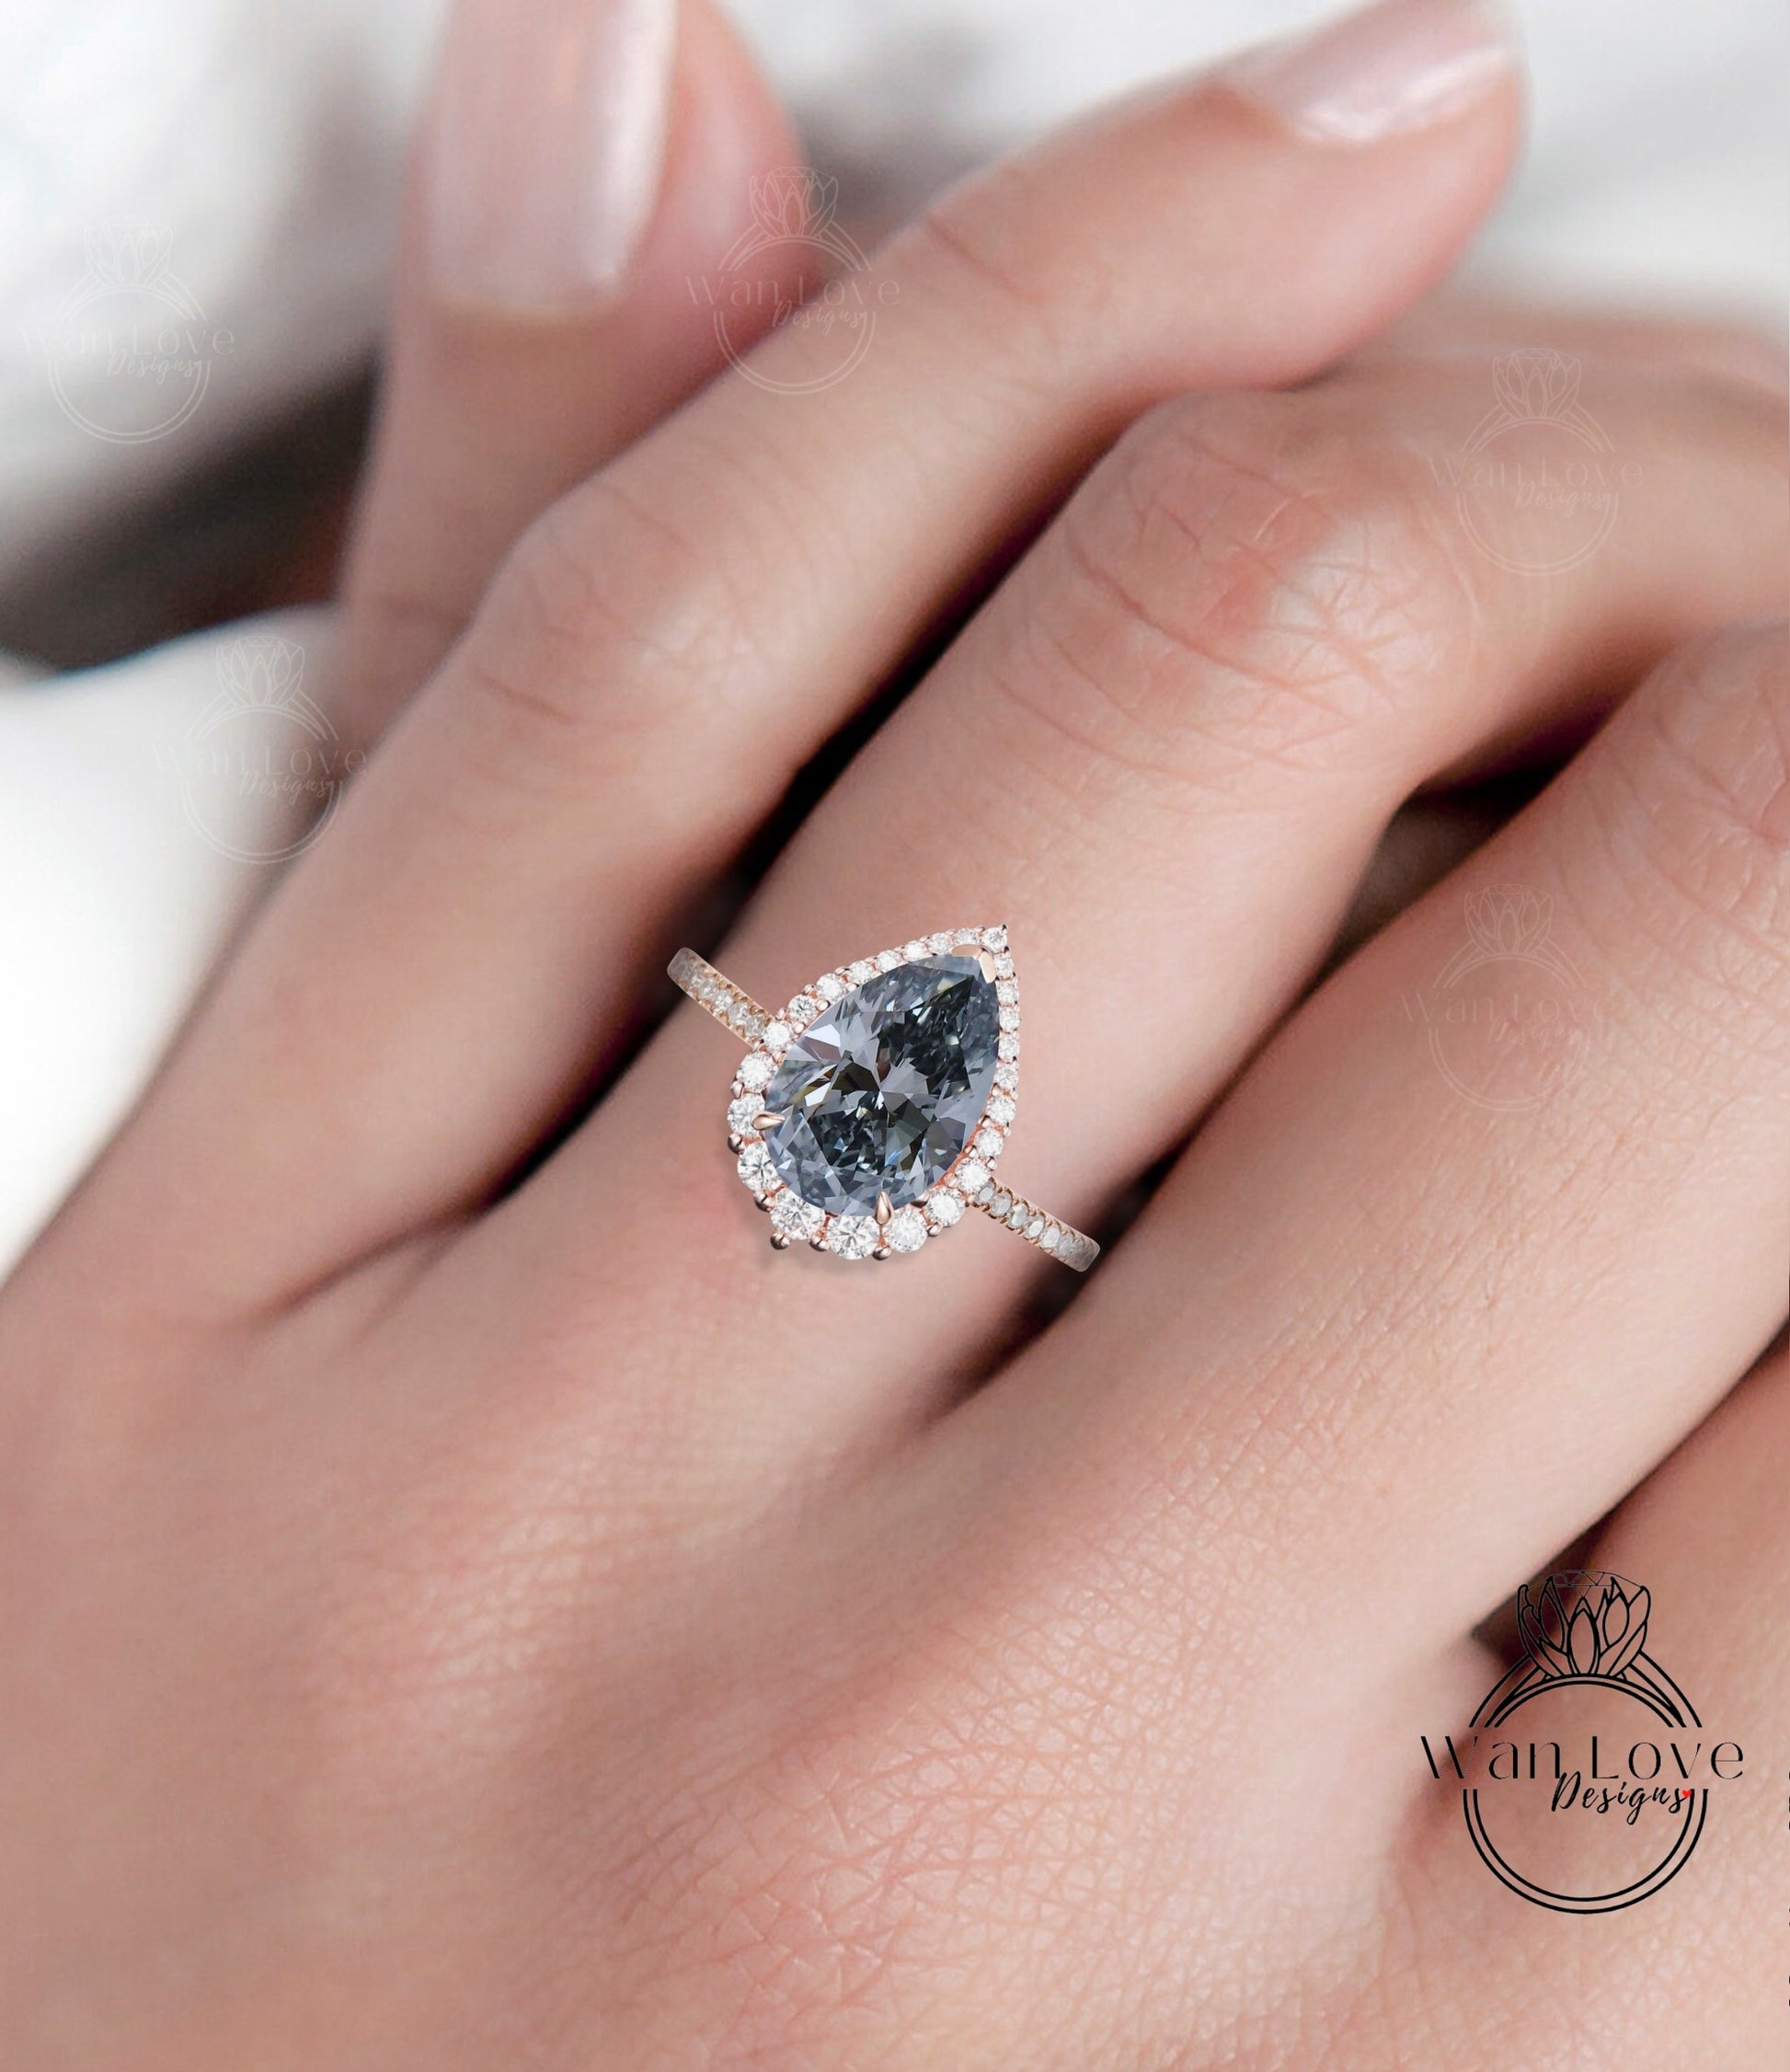 Antique Pear shaped Gray Moissanite engagement ring vintage Art deco Unique ring white gold Diamond halo wedding promise ring Anniversary ring Wan Love Designs